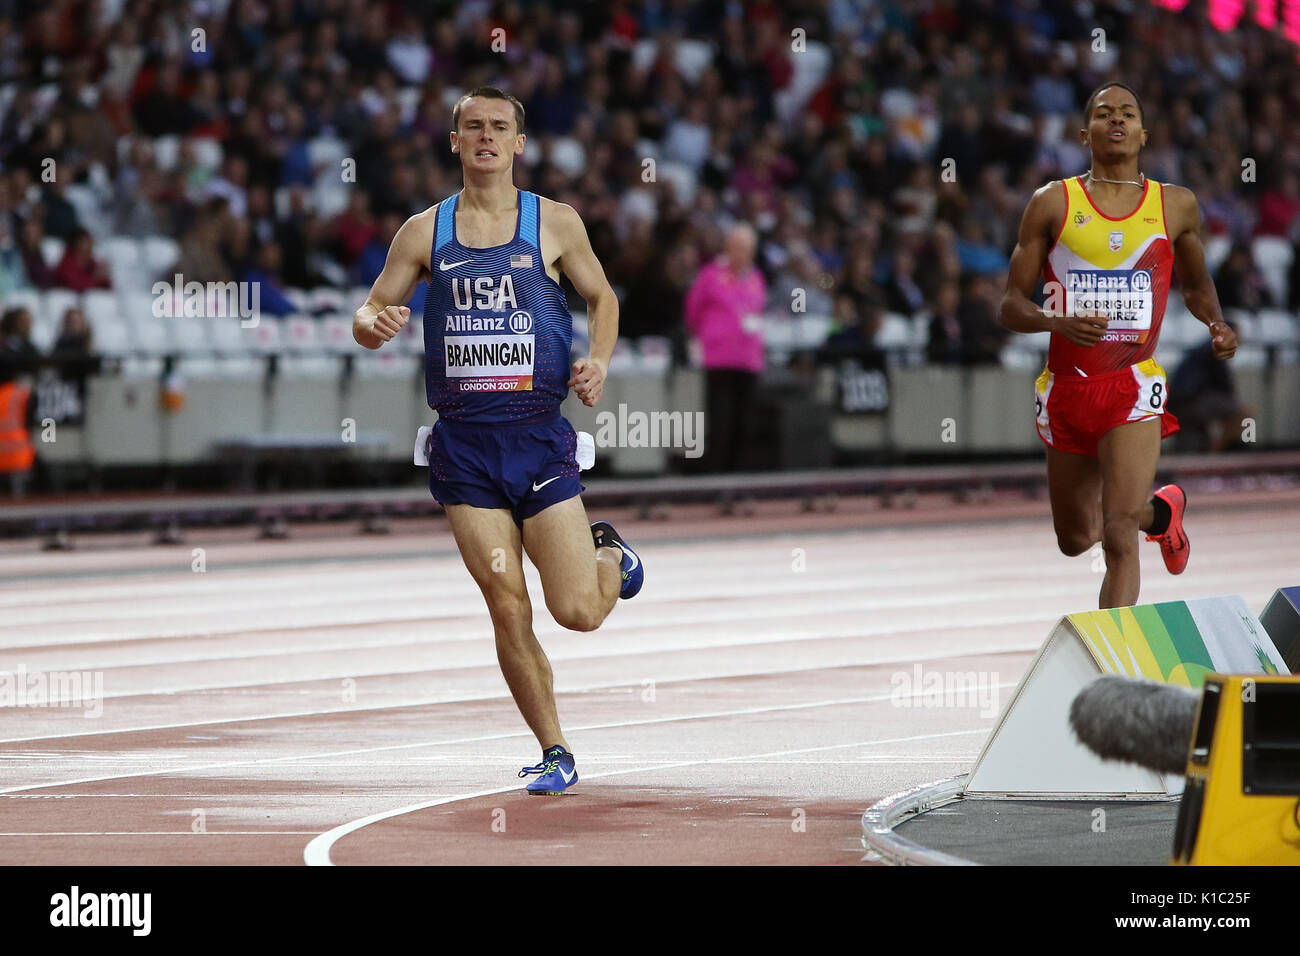 Michael BRANNIGAN of the USA in the Men's 800 m T20 Final at the World Para Championships in London 2017 Stock Photo